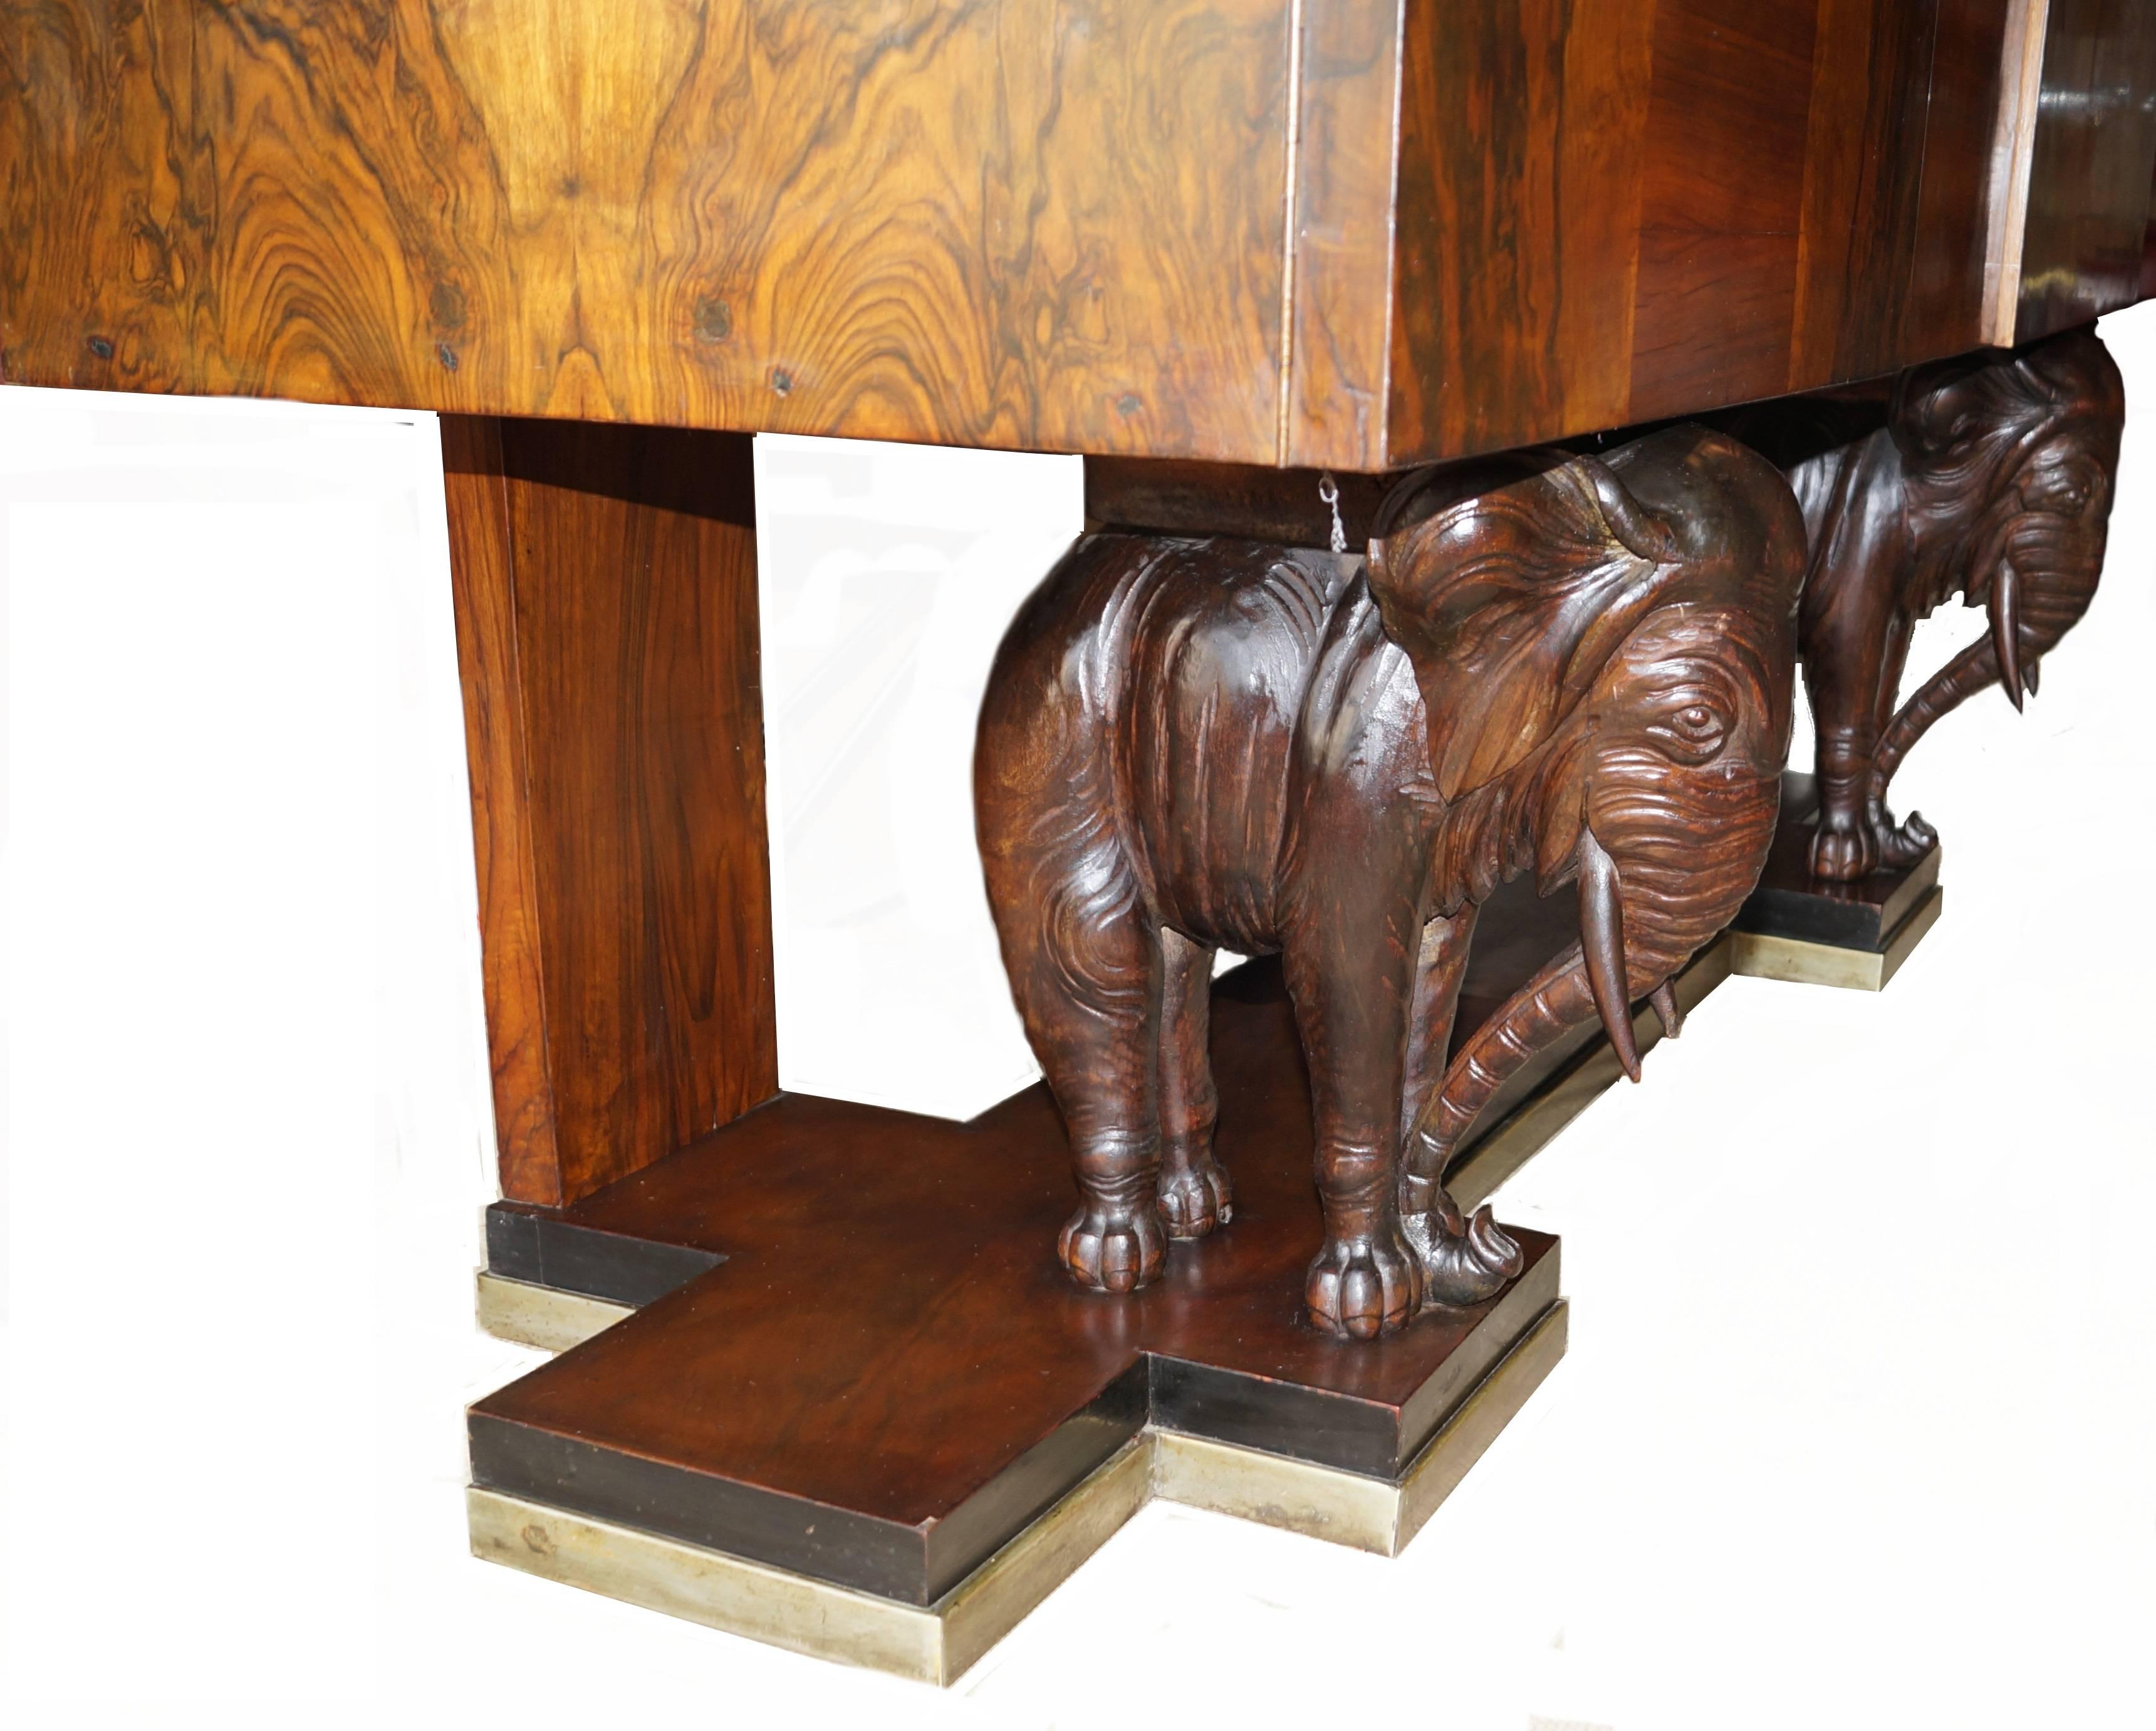 Early 20th Century Figural Art Deco Burl Wood Carved Elephant Sideboard Buffet Credenza Console